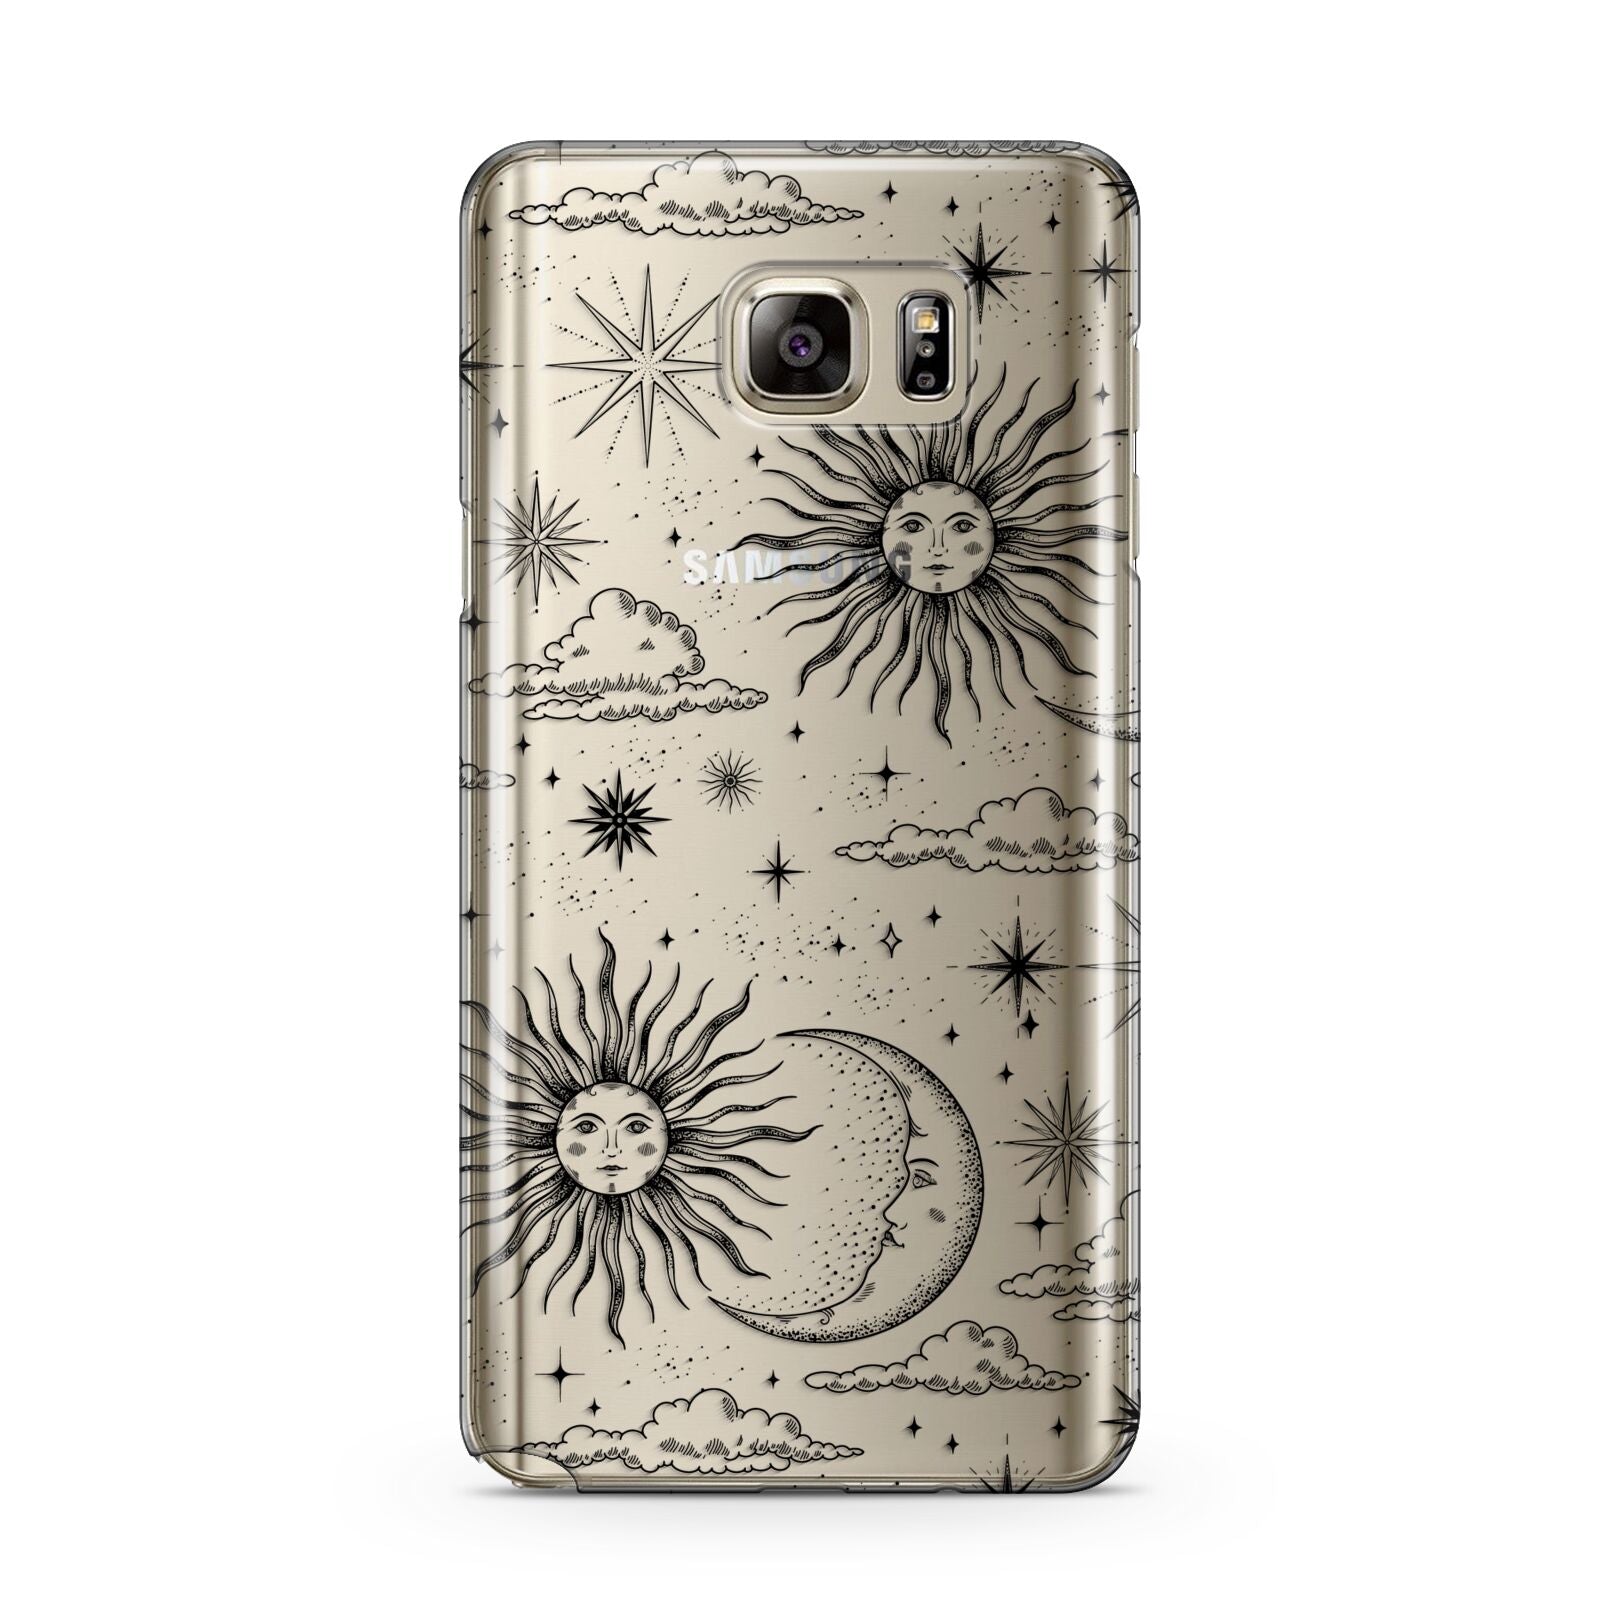 Celestial Suns Clouds Samsung Galaxy Note 5 Case